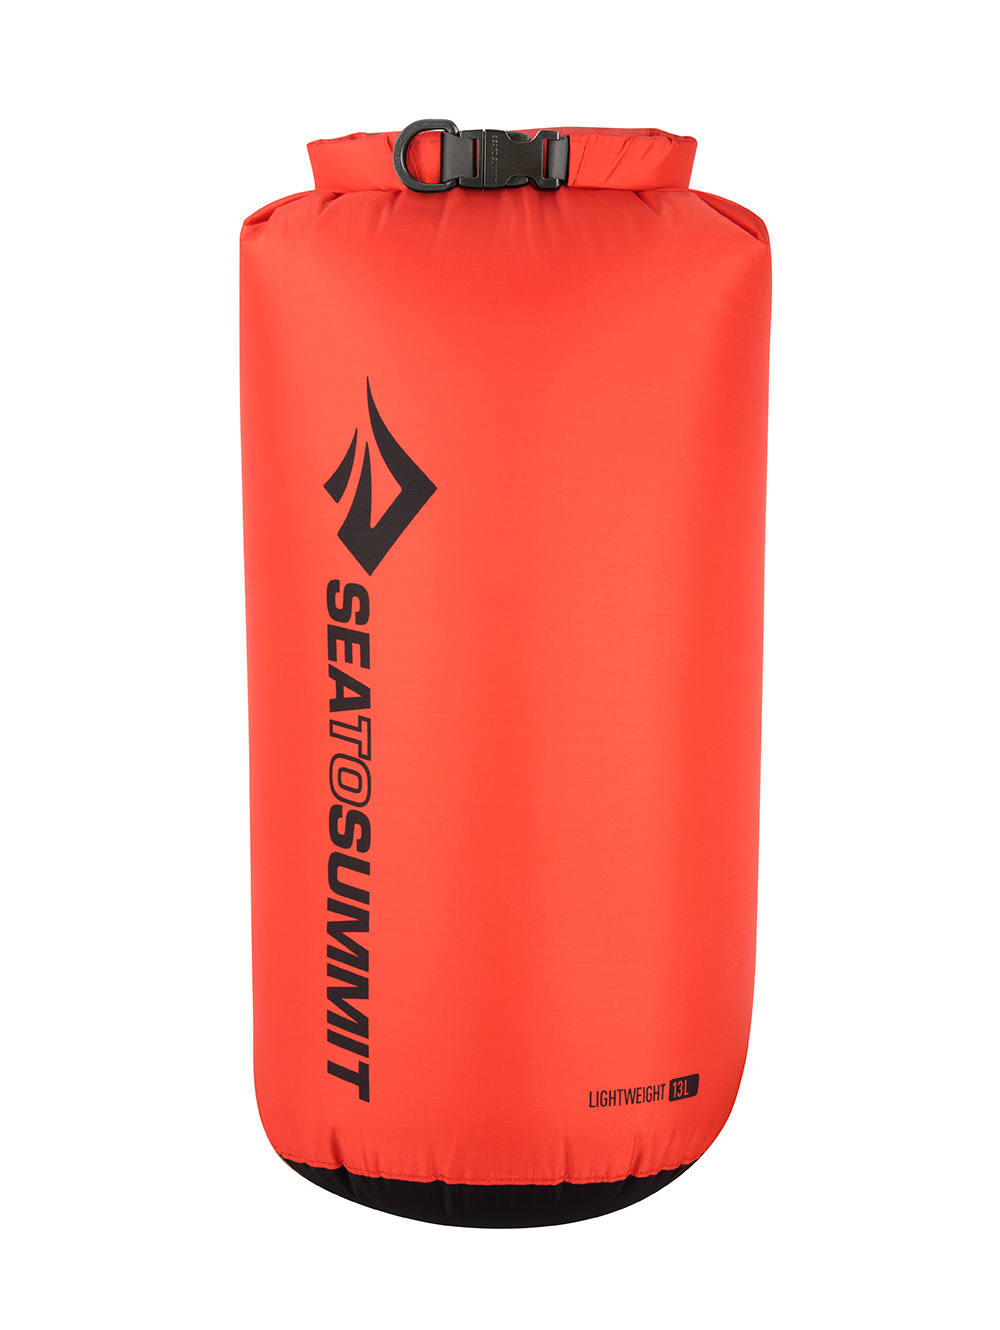 Sea to Summit 13ltr Lightweight Dry Bag Red